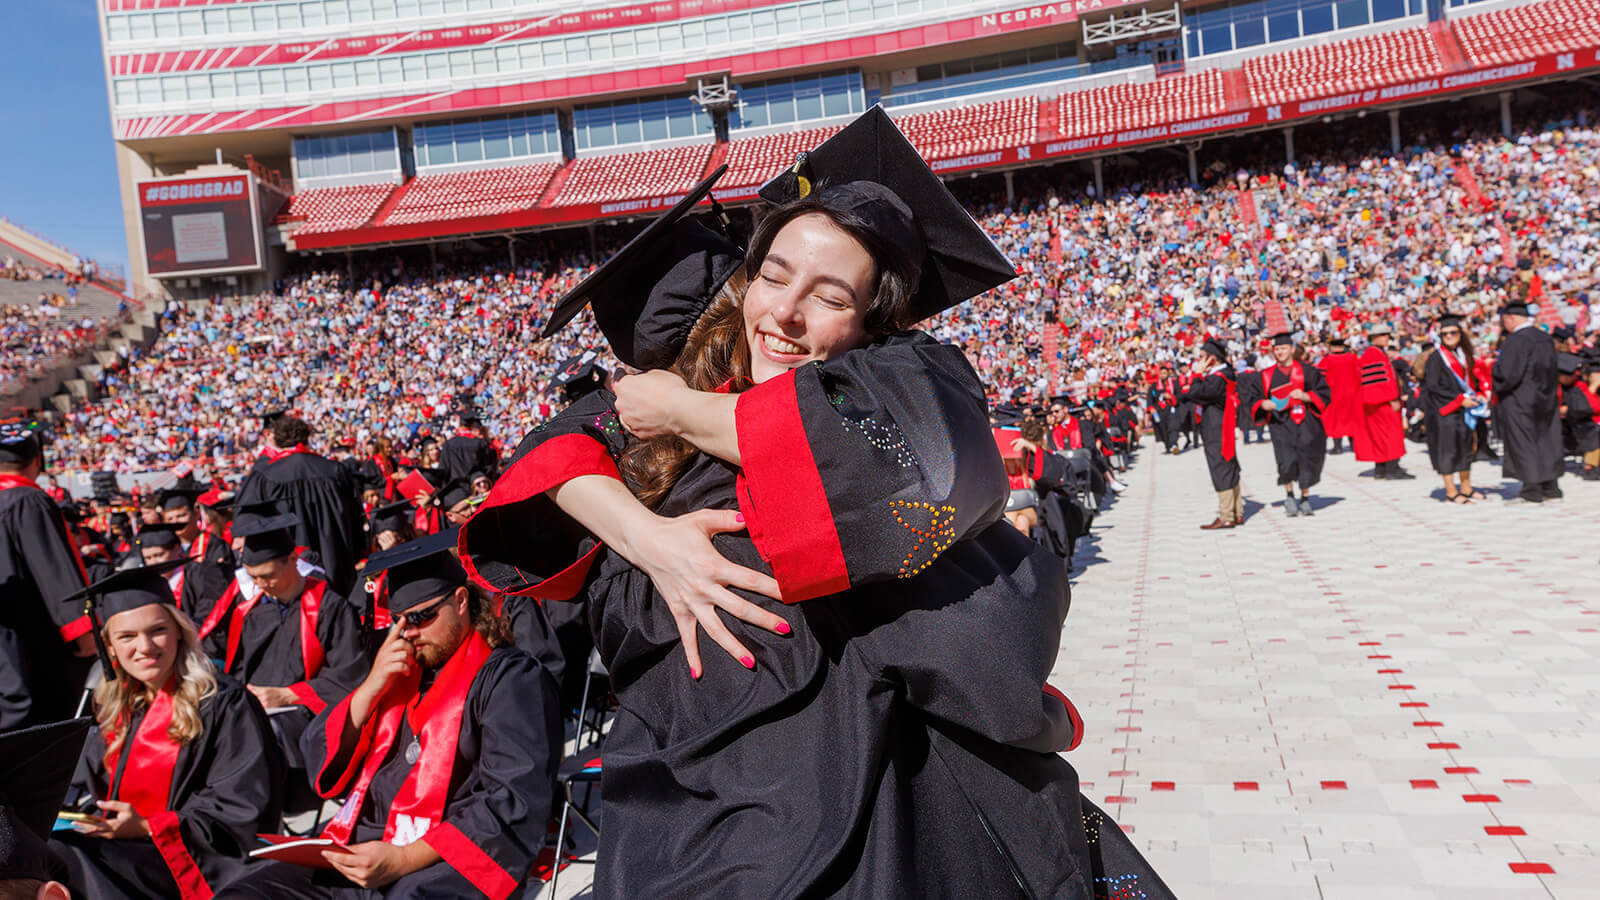 Students hugging each other at ceremony in Memorial Stadium